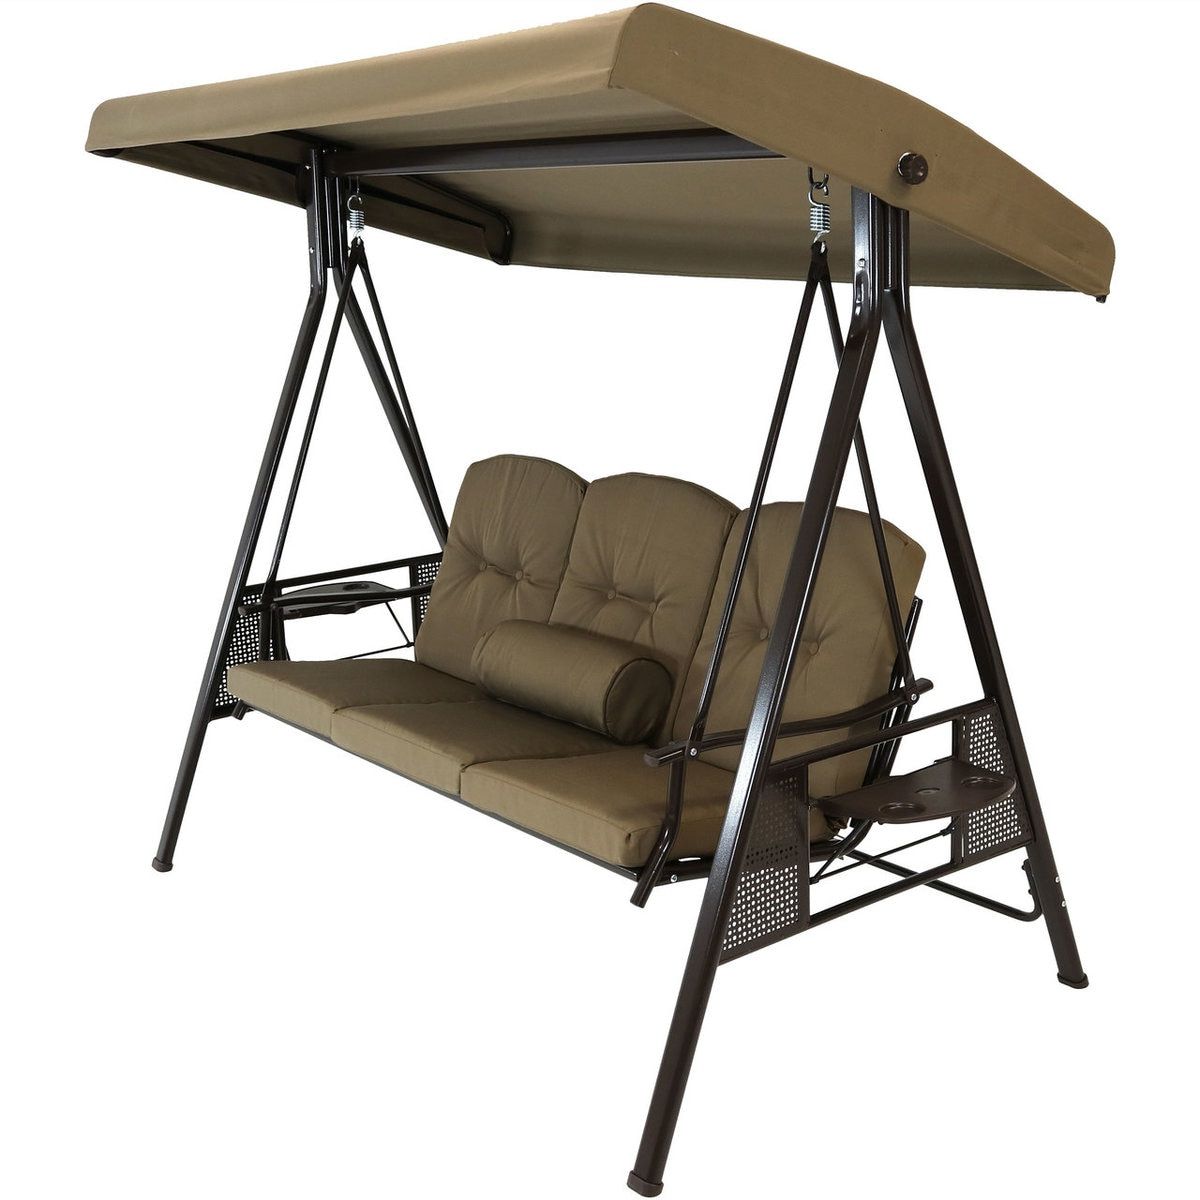 Cushions And Pillow Included Brown Durable Steel Metal Frame Throughout Most Up To Date 3 Person Brown Steel Outdoor Swings (View 1 of 25)